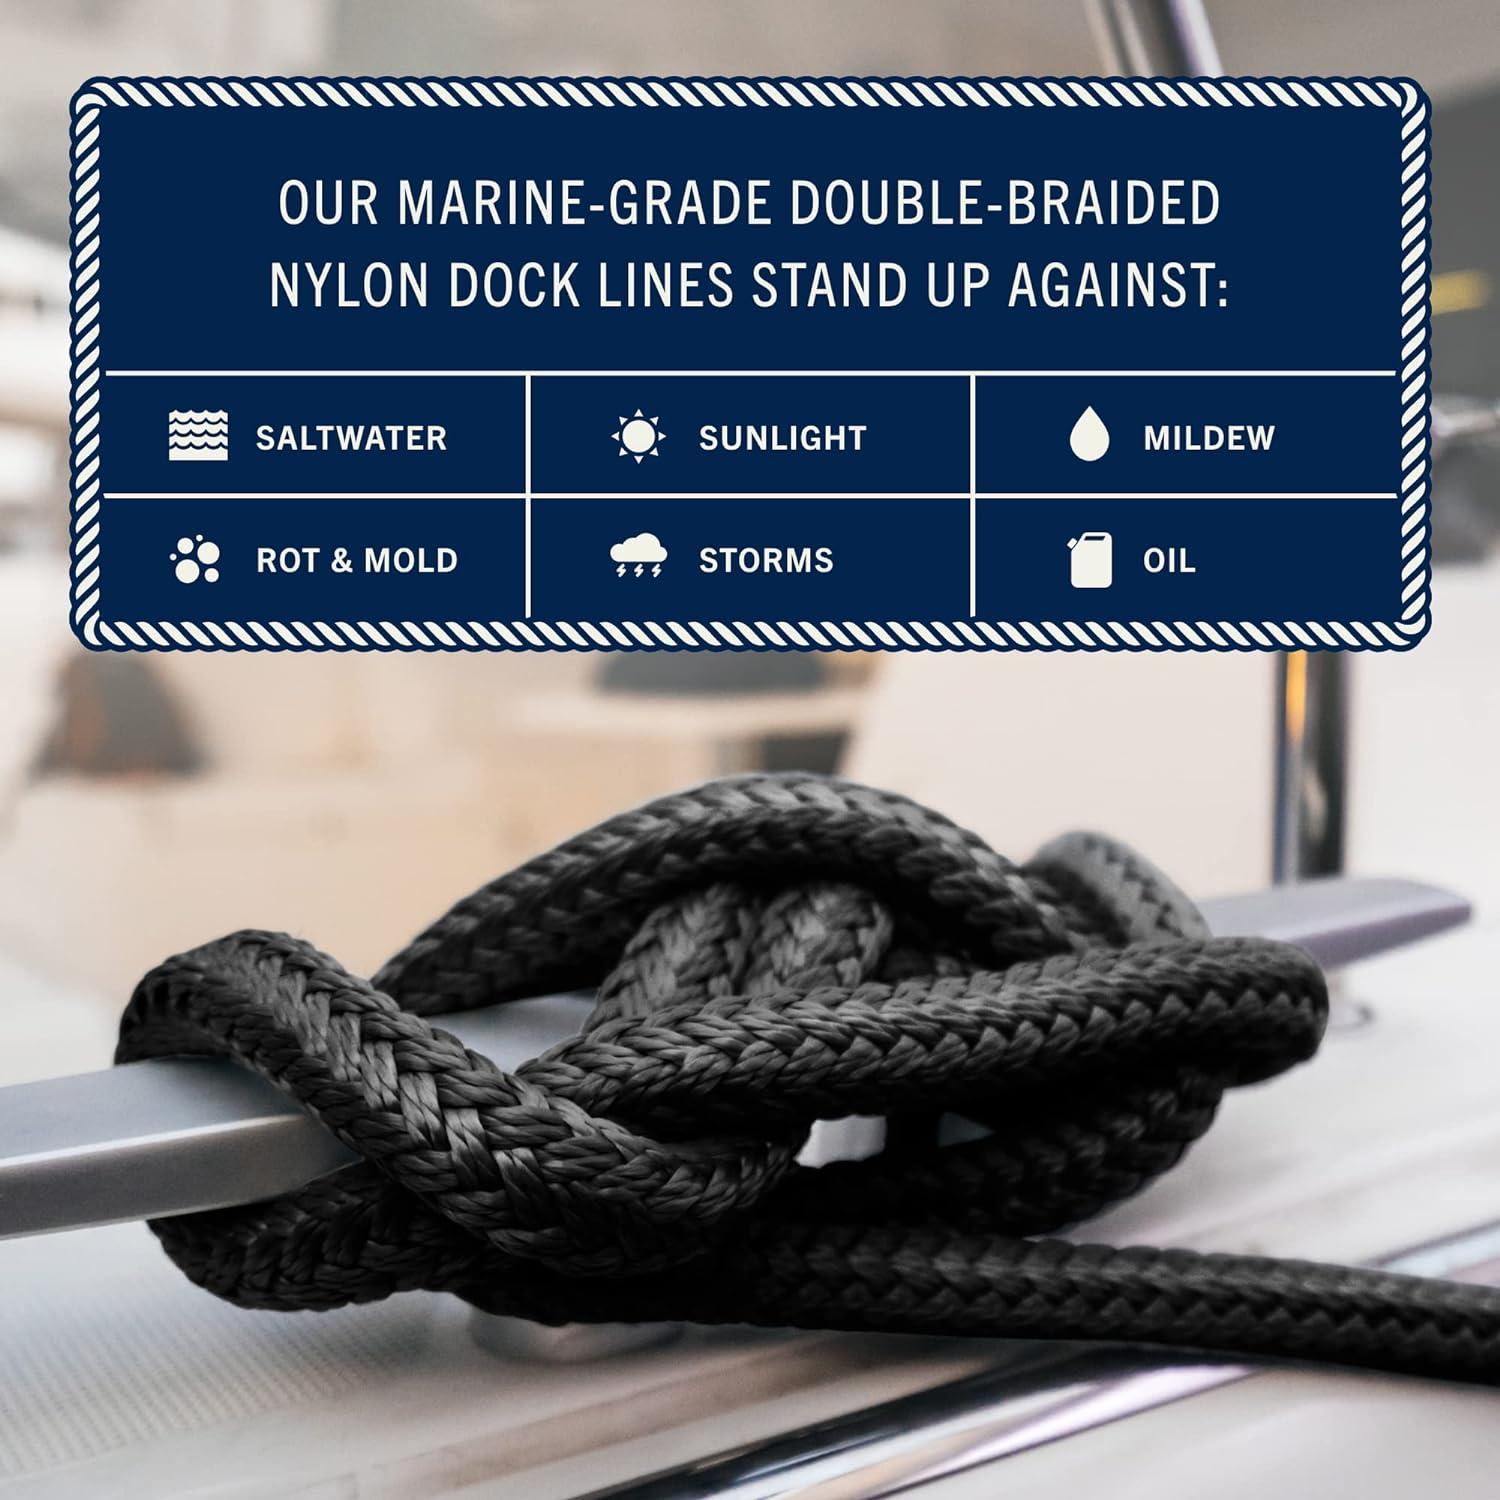 Rainier Supply Co. 4-Pack Boat Dock Lines - 15 ft x 3/8 inch Boat Rope -  Premium Double Braided Nylon Dock Rope - Mooring Lines with 12 Eyelet -  Black 15' x 3/8 4 Pack - Black Nylon